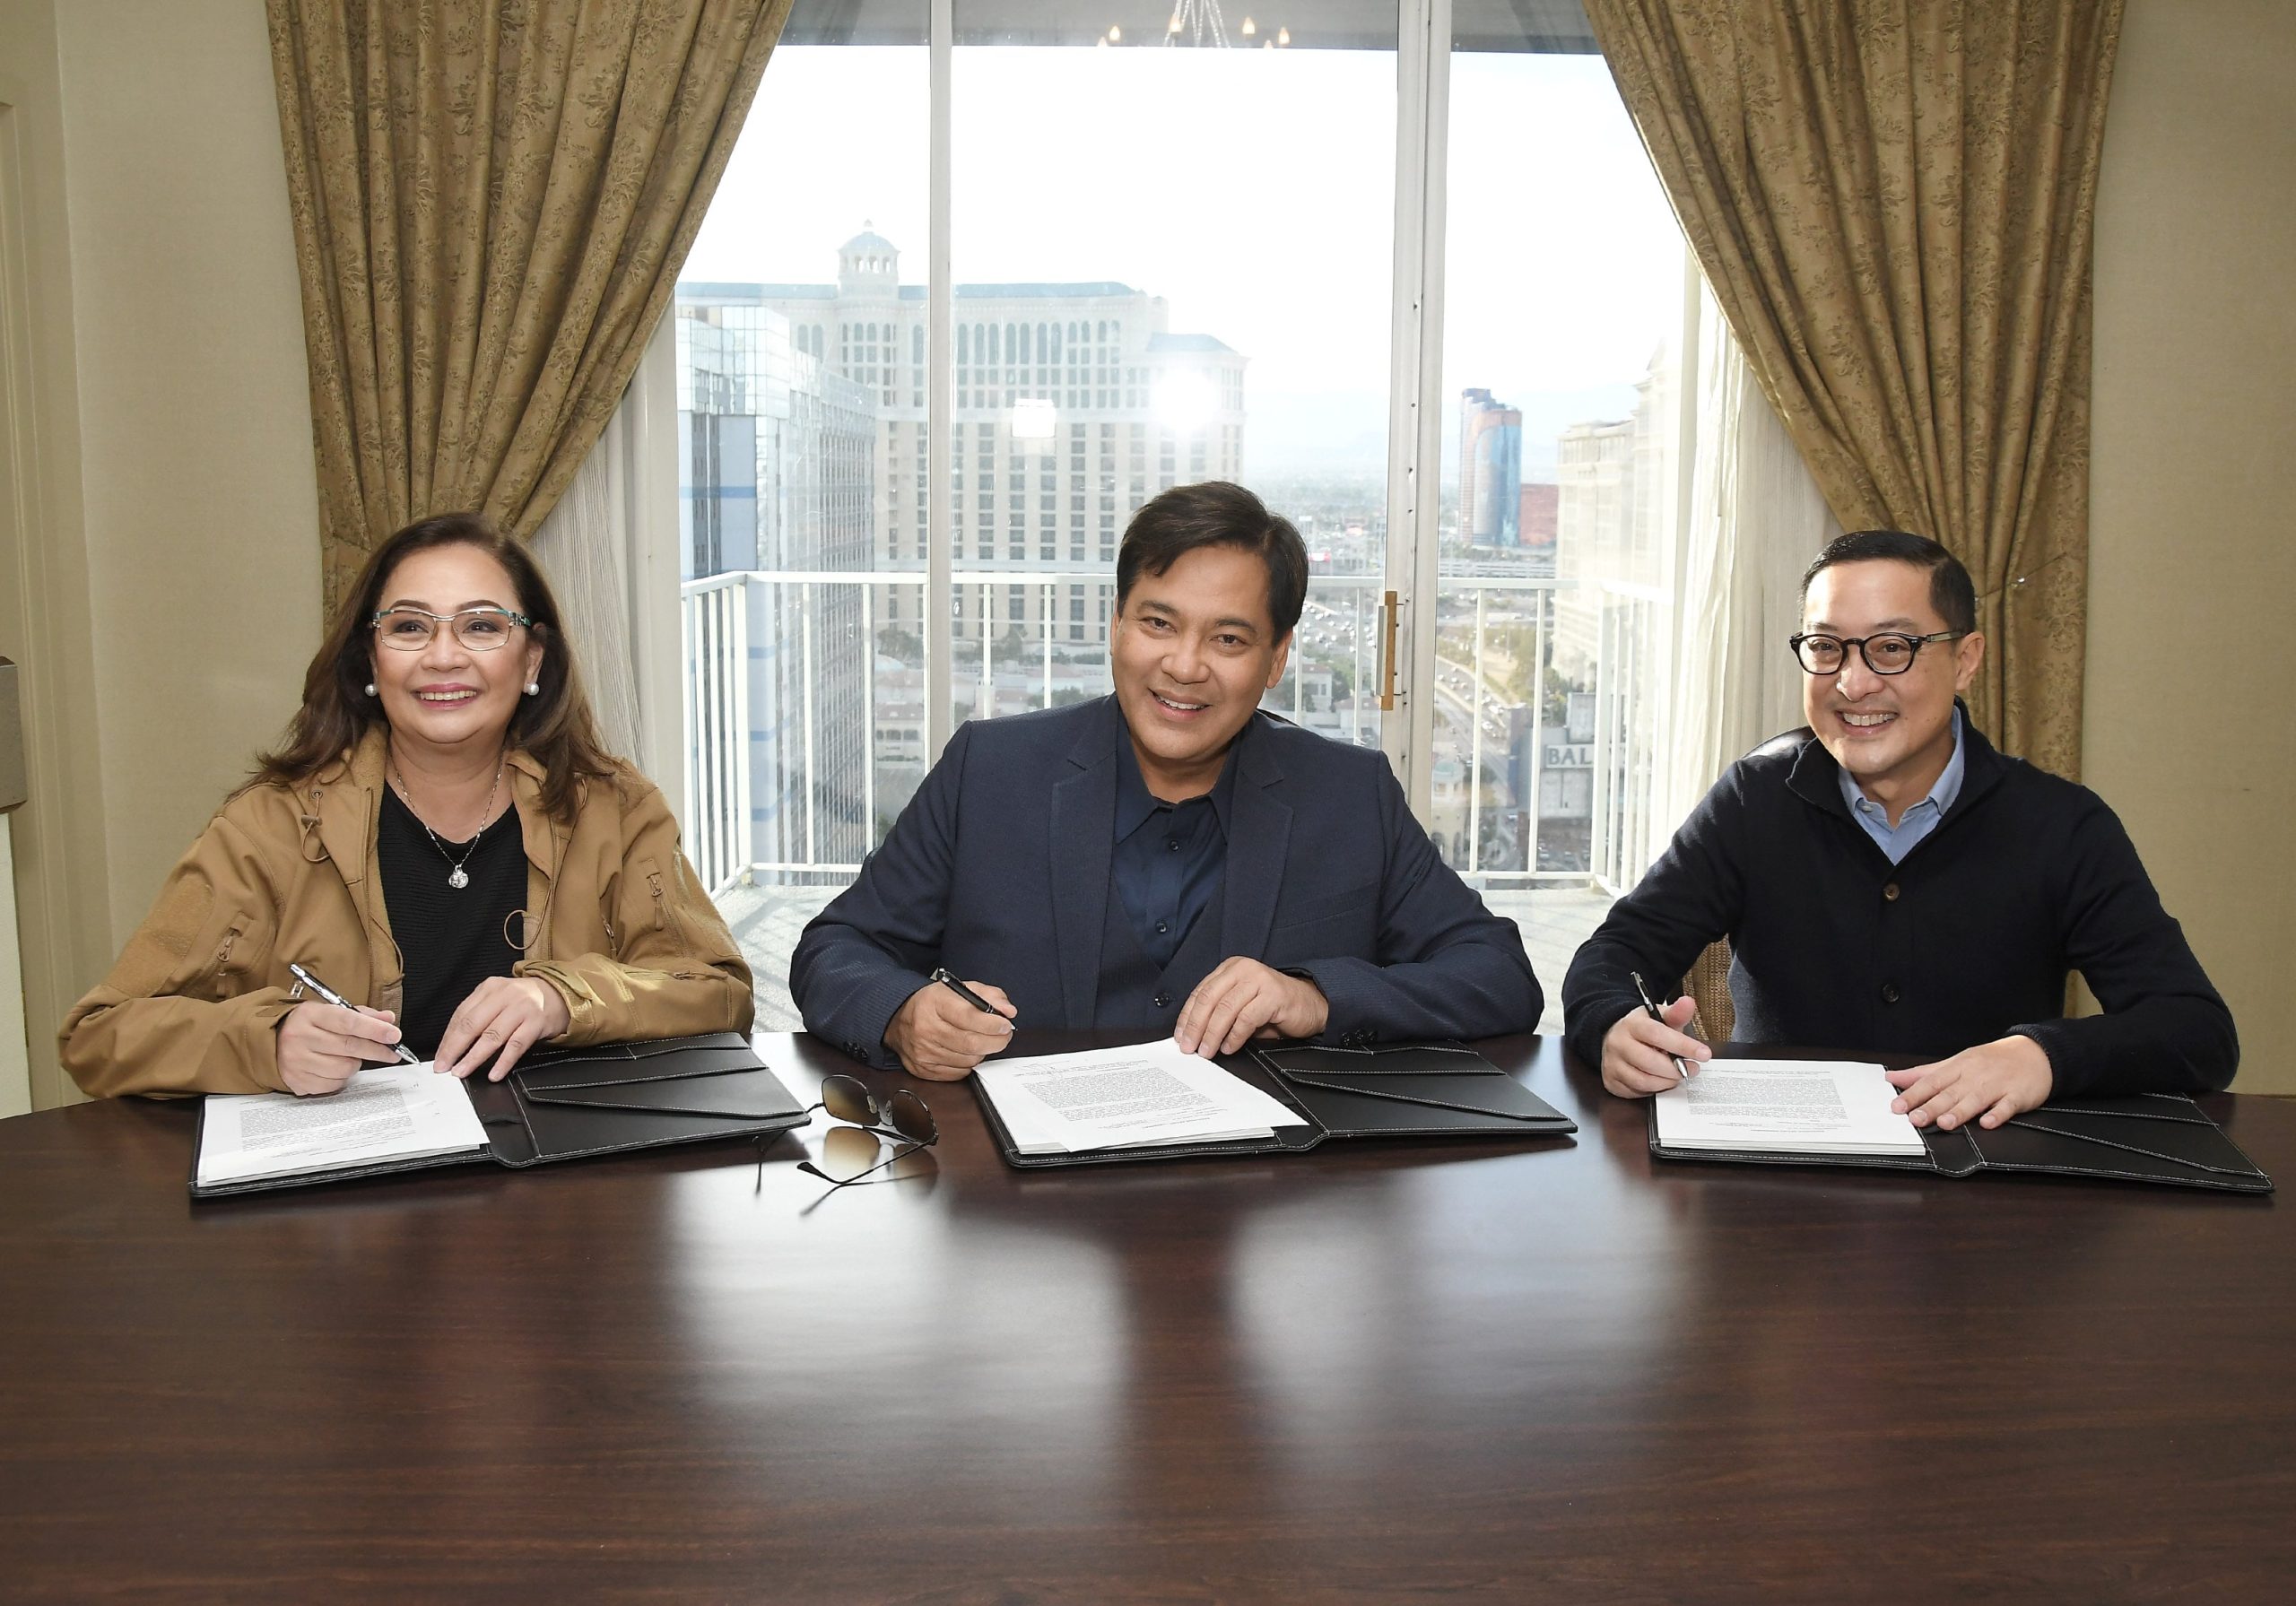 martin renews contract with abs-cbn (photo courtesy of sthanlee mirador)